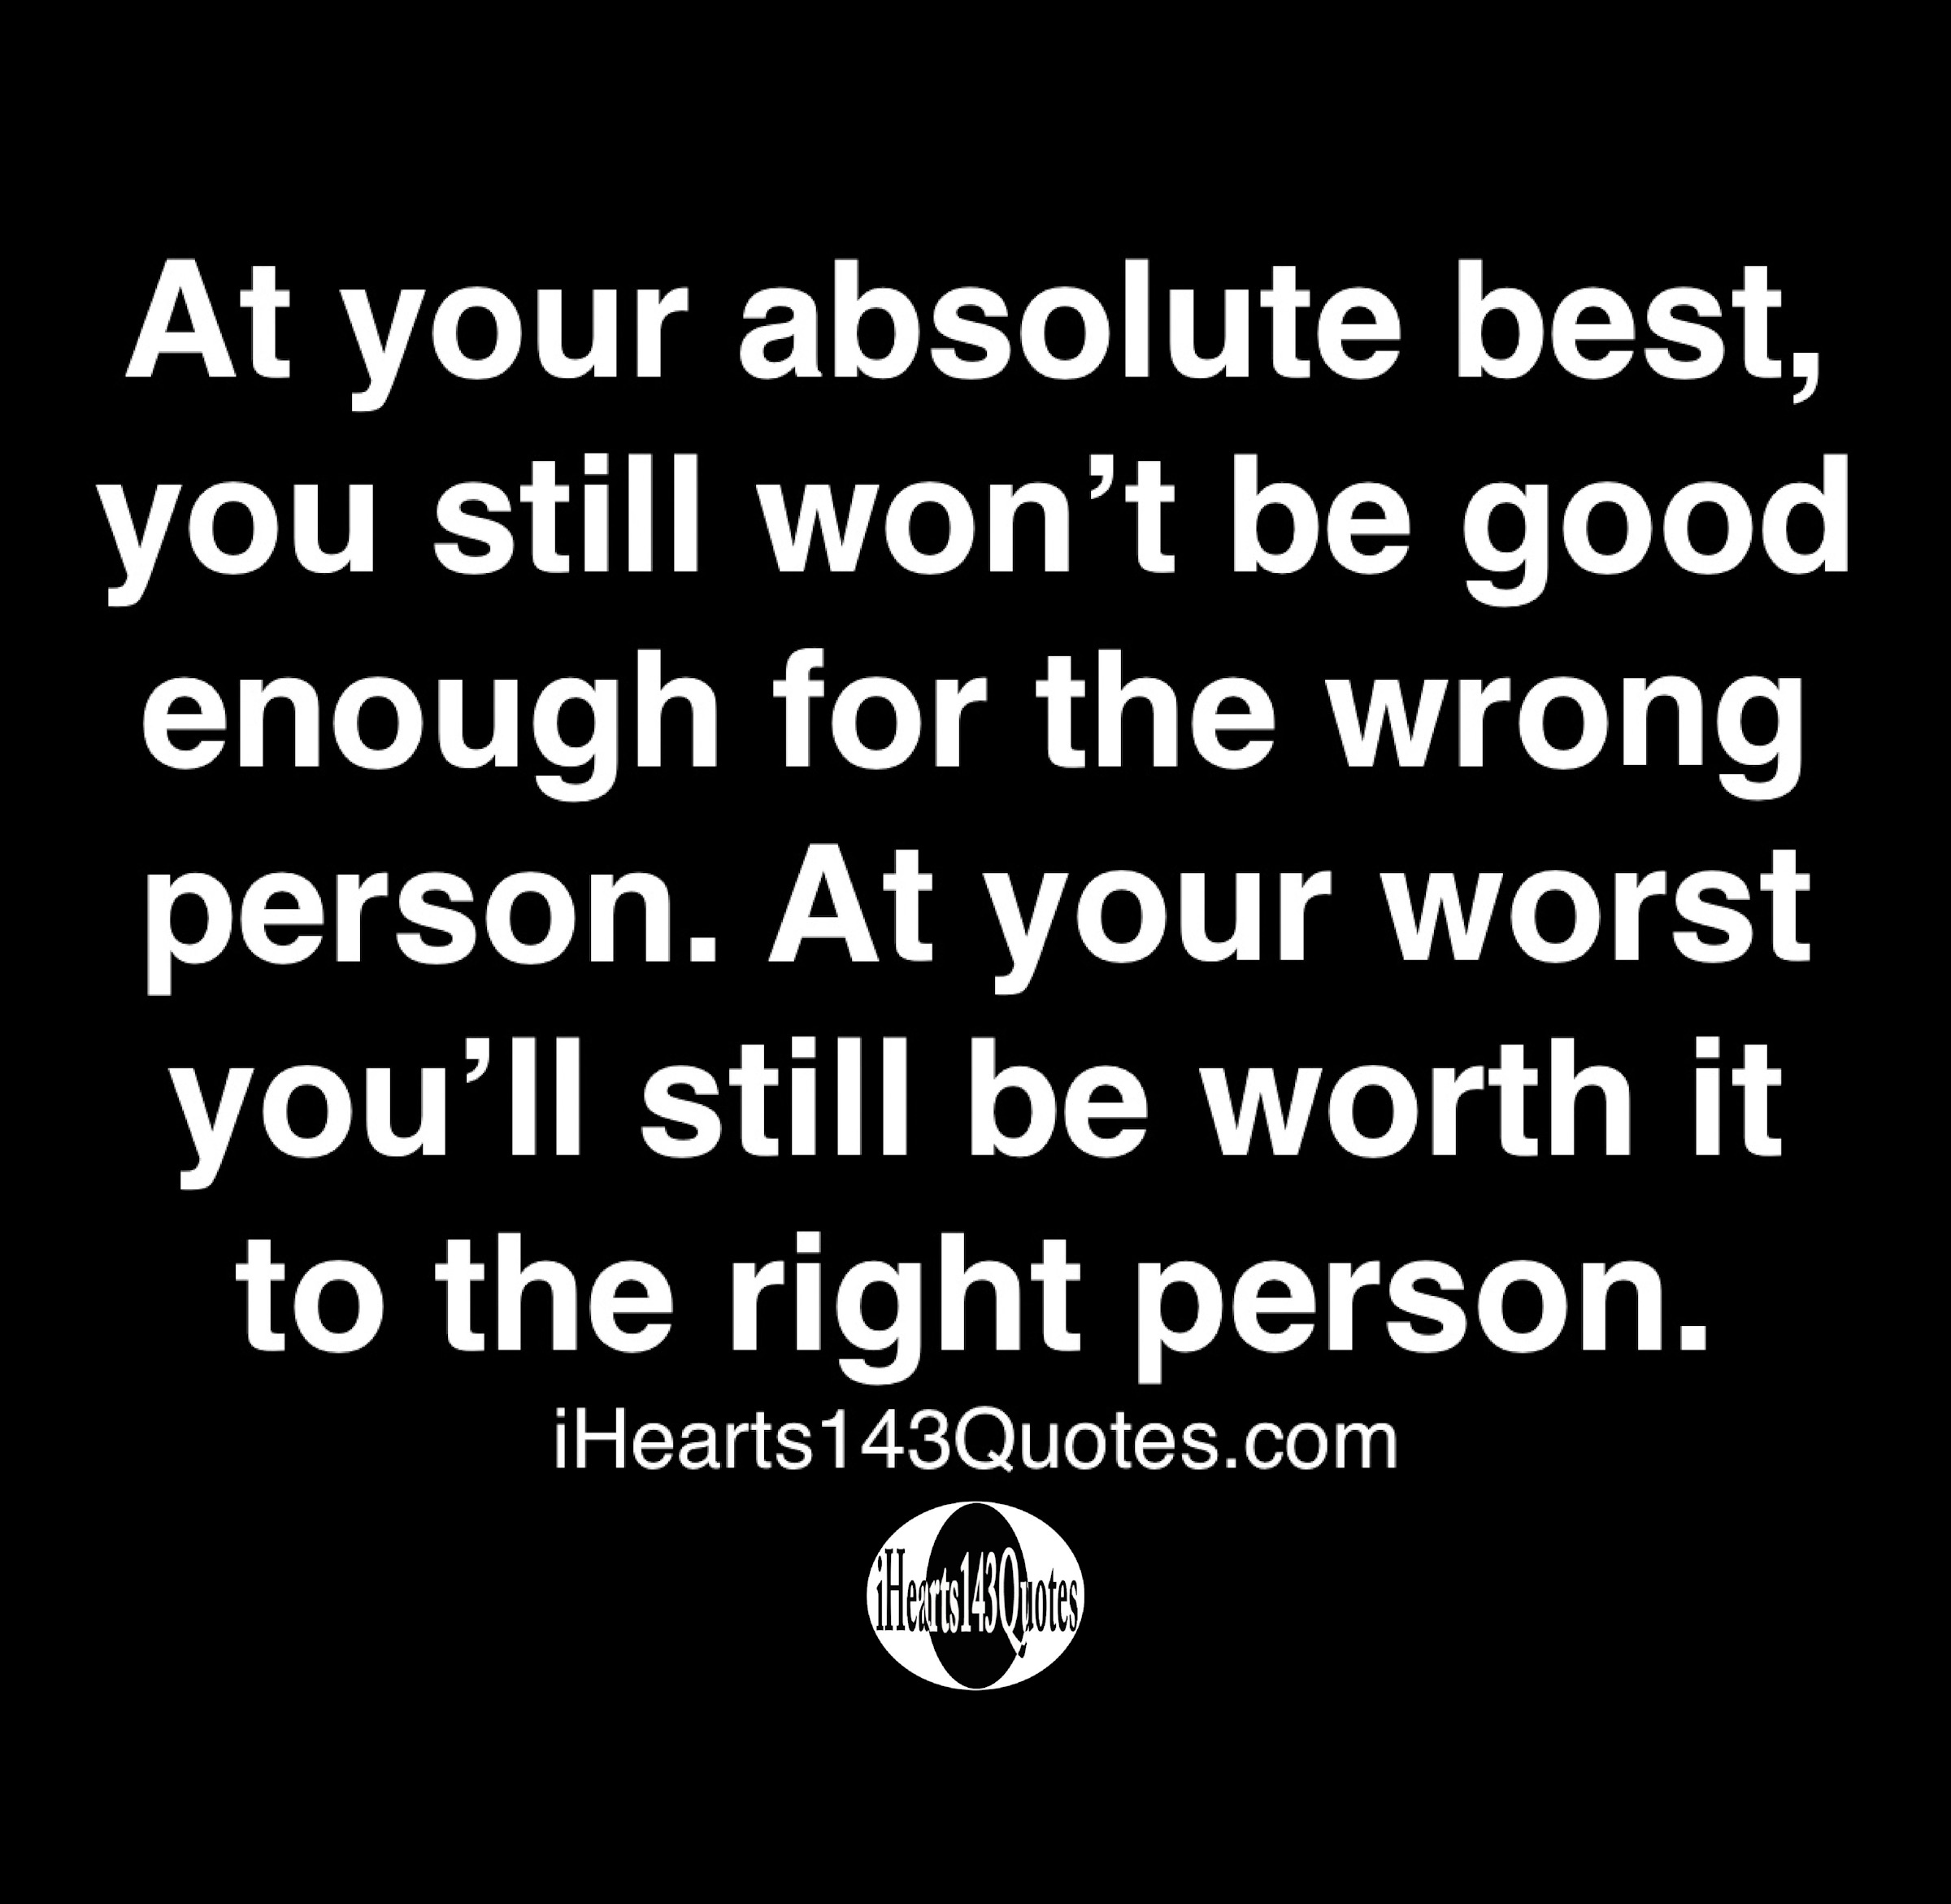 At Your Absolute Best You Still Won T Be Good Enough For The Wrong Person At Your Worst You Ll Still Be Worth It To The Right Person Quotes Ihearts143quotes